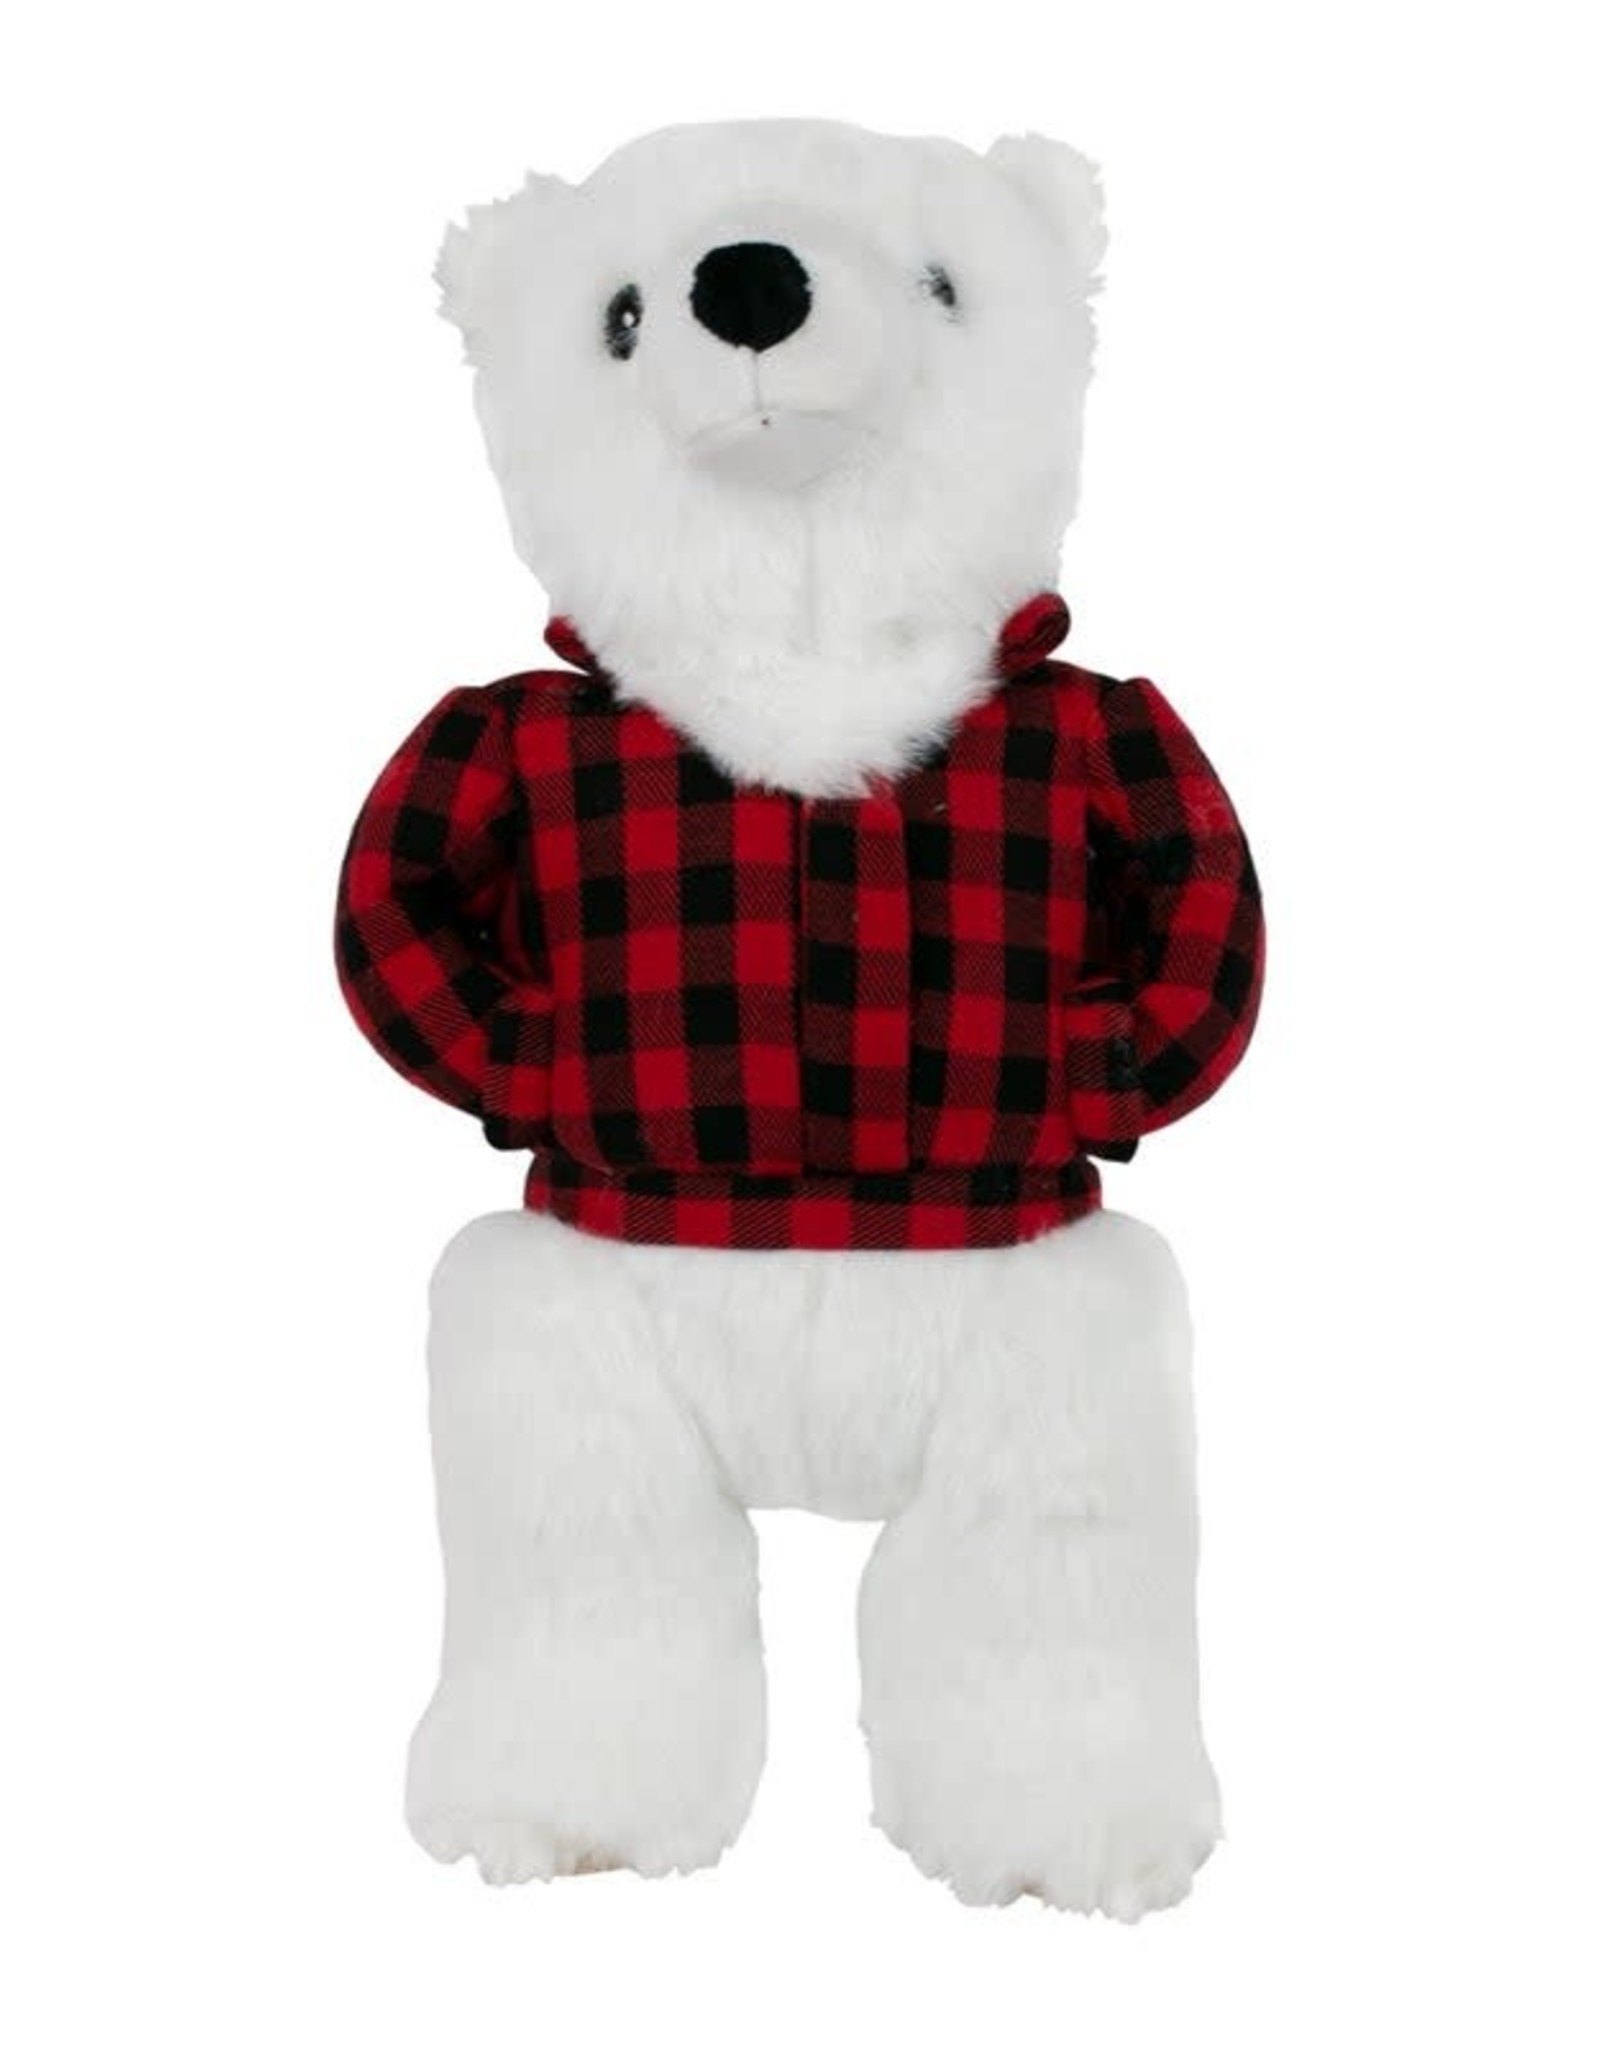 Tall Tails Tall Tails Holiday Polar Bear with Jacket